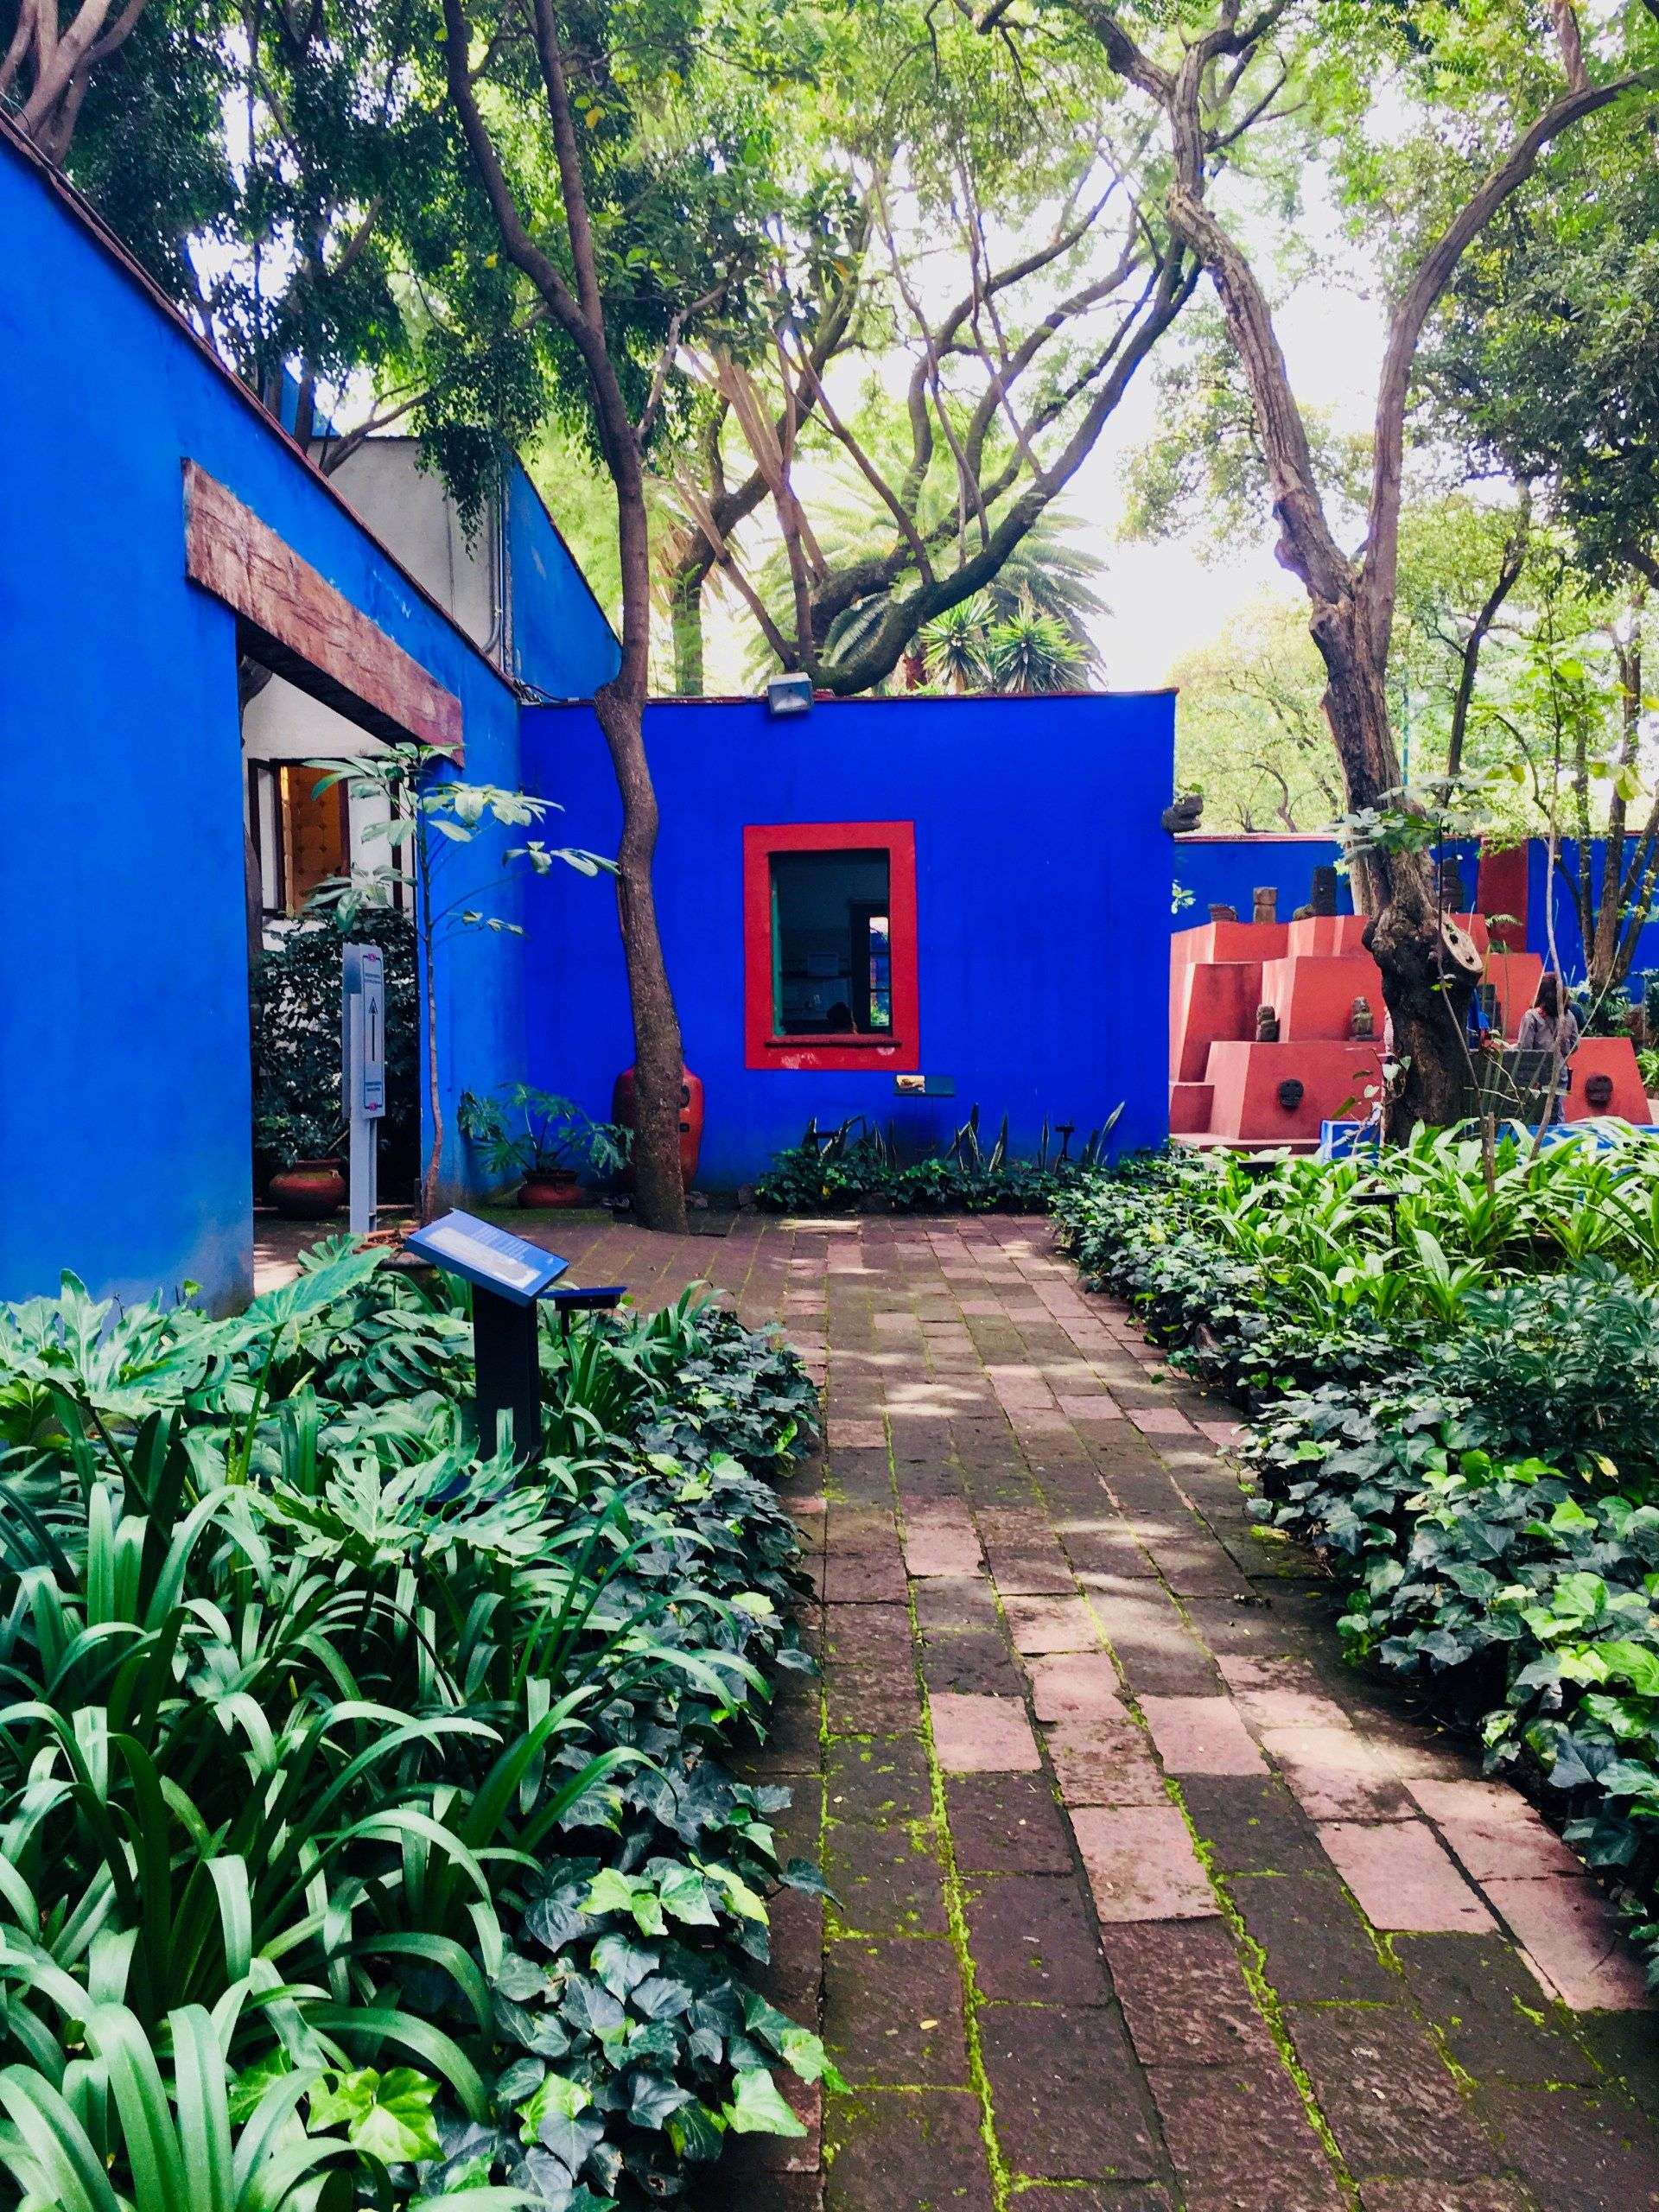 How to Buy Frida Kahlo Museum Tickets